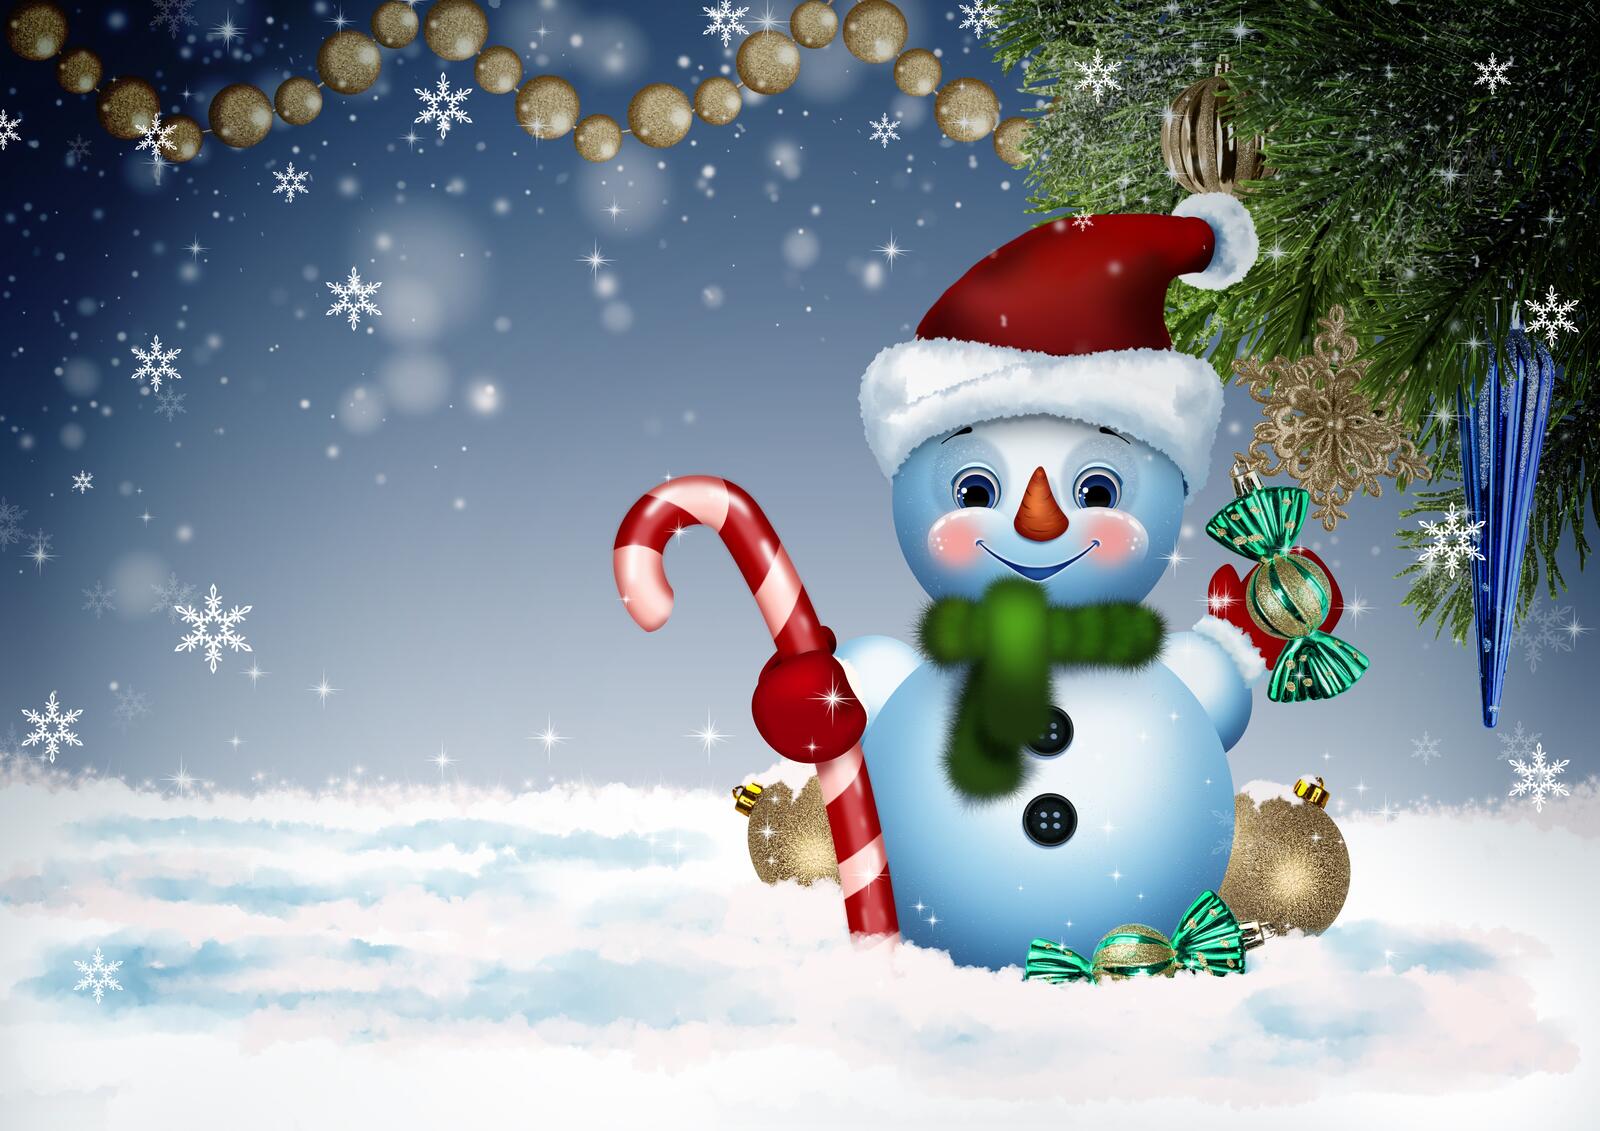 Wallpapers snowman Christmas background on the desktop